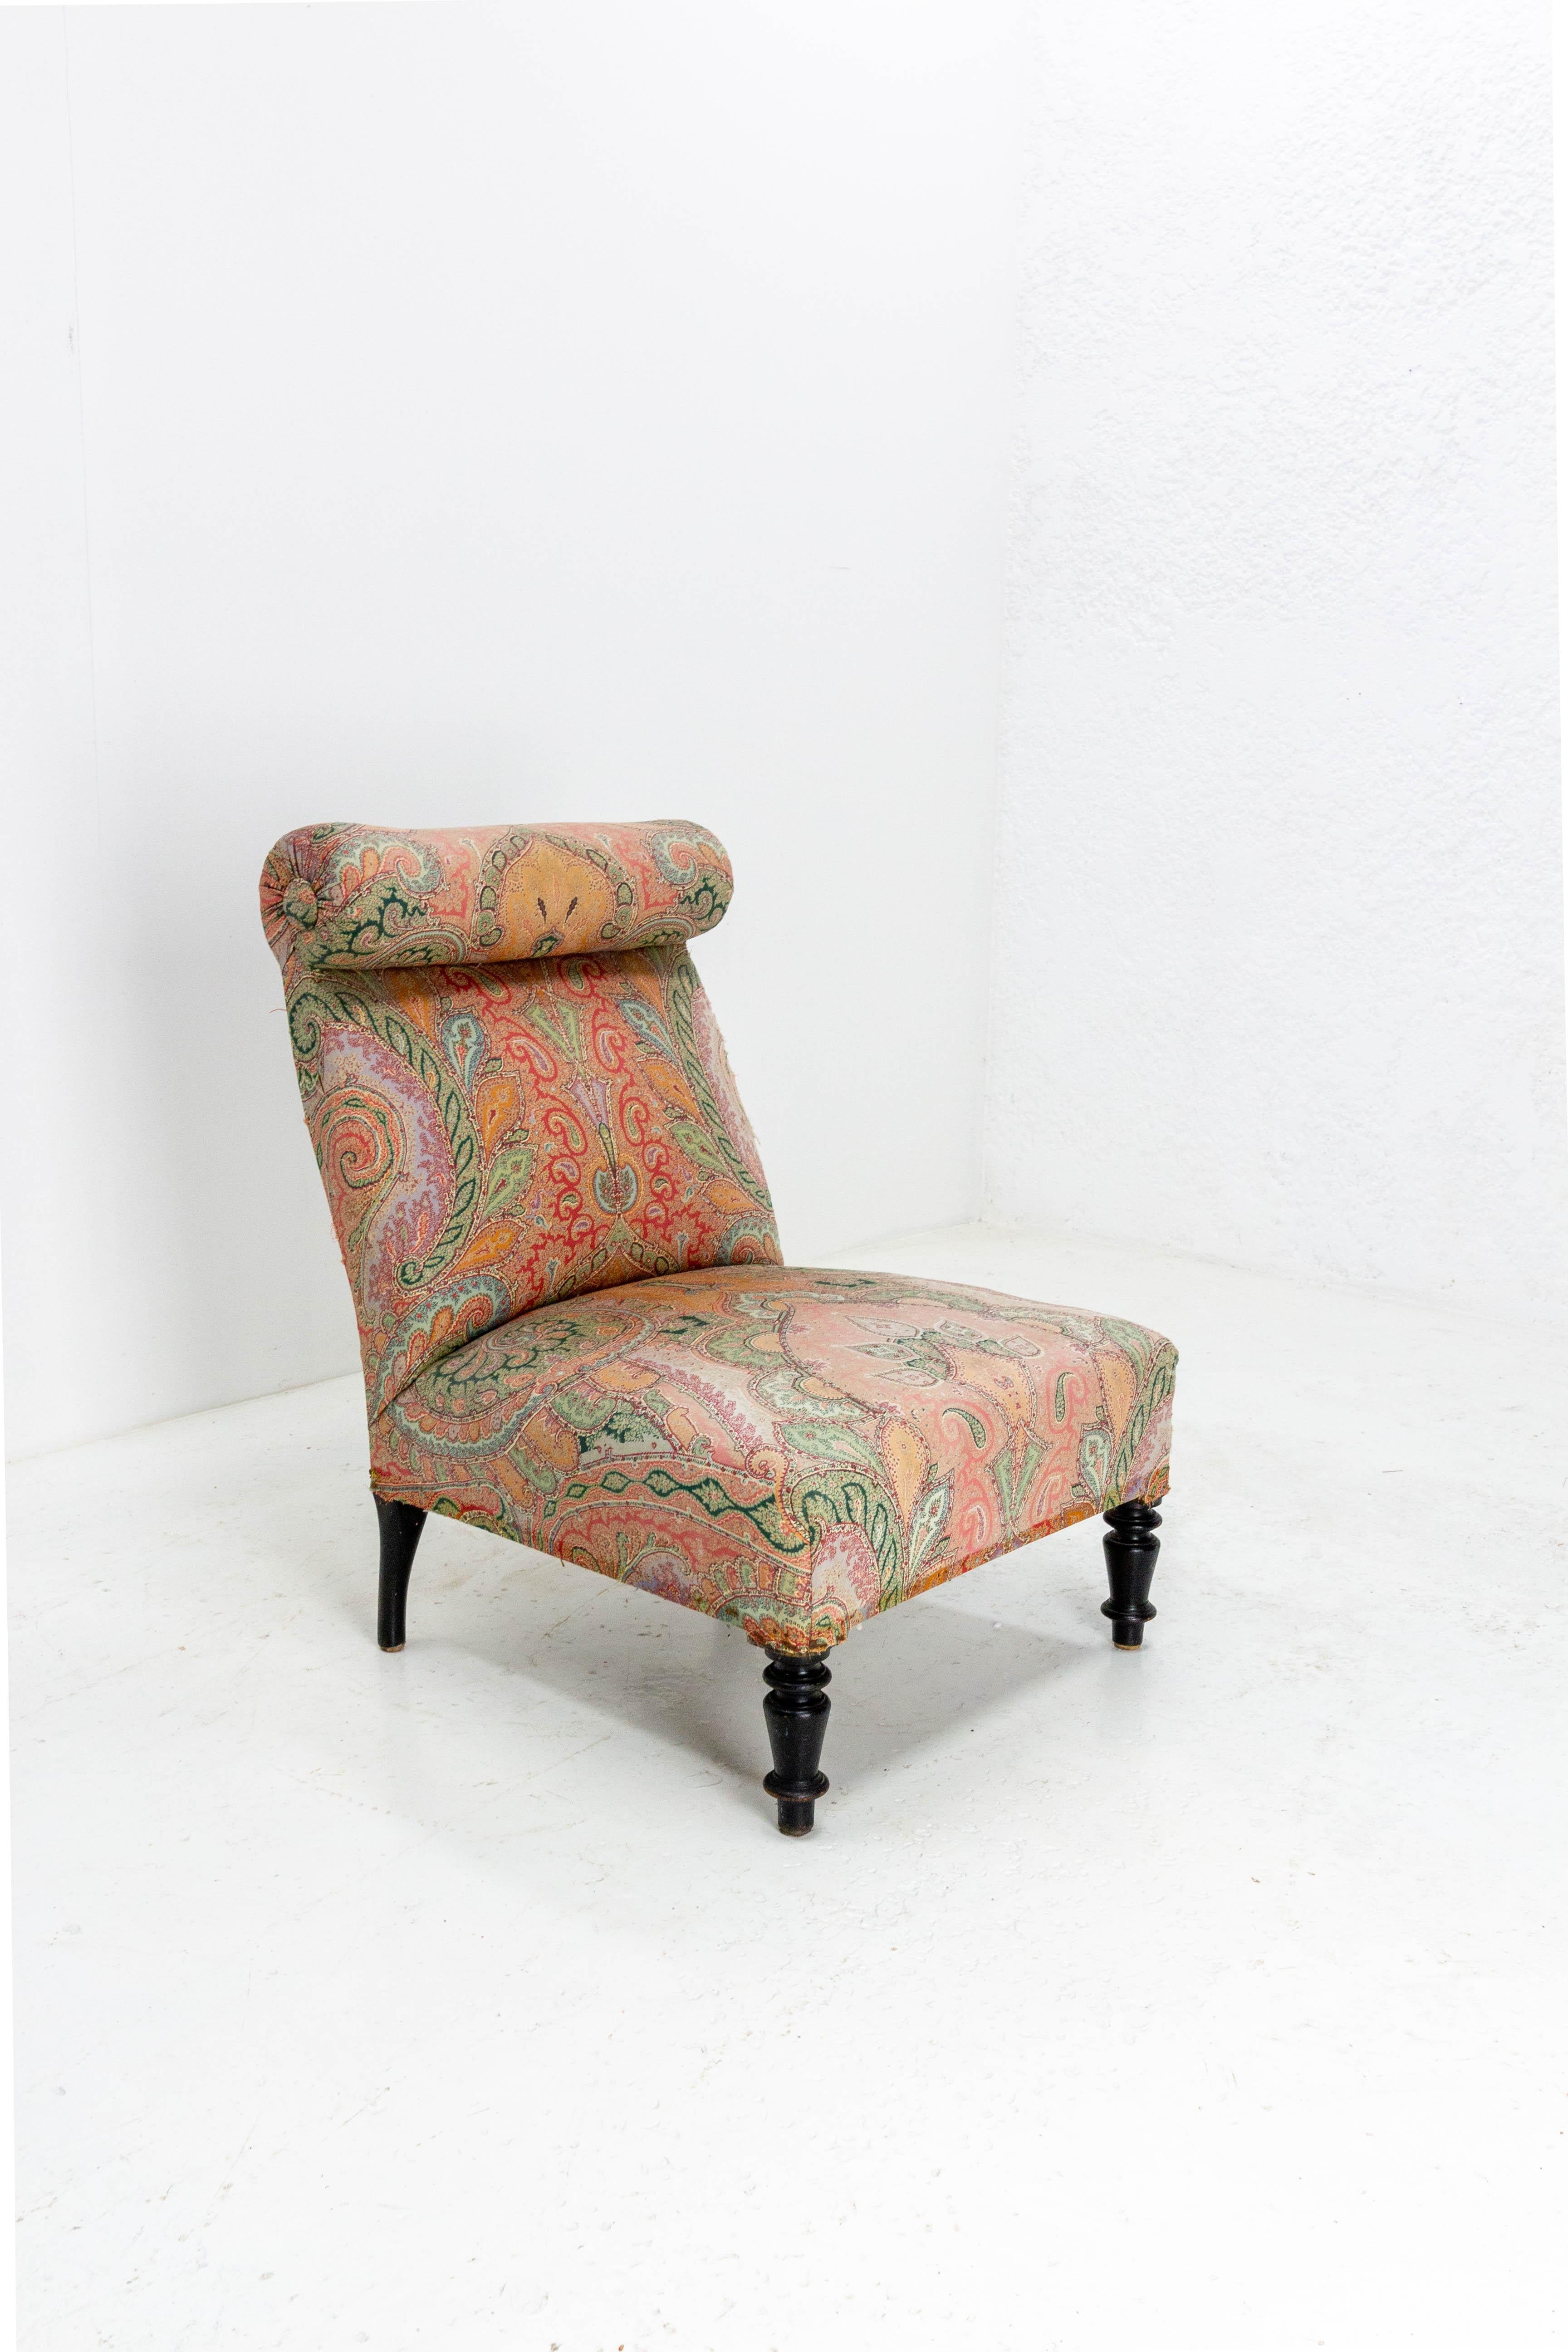 Late 19th Century Antique Chair 